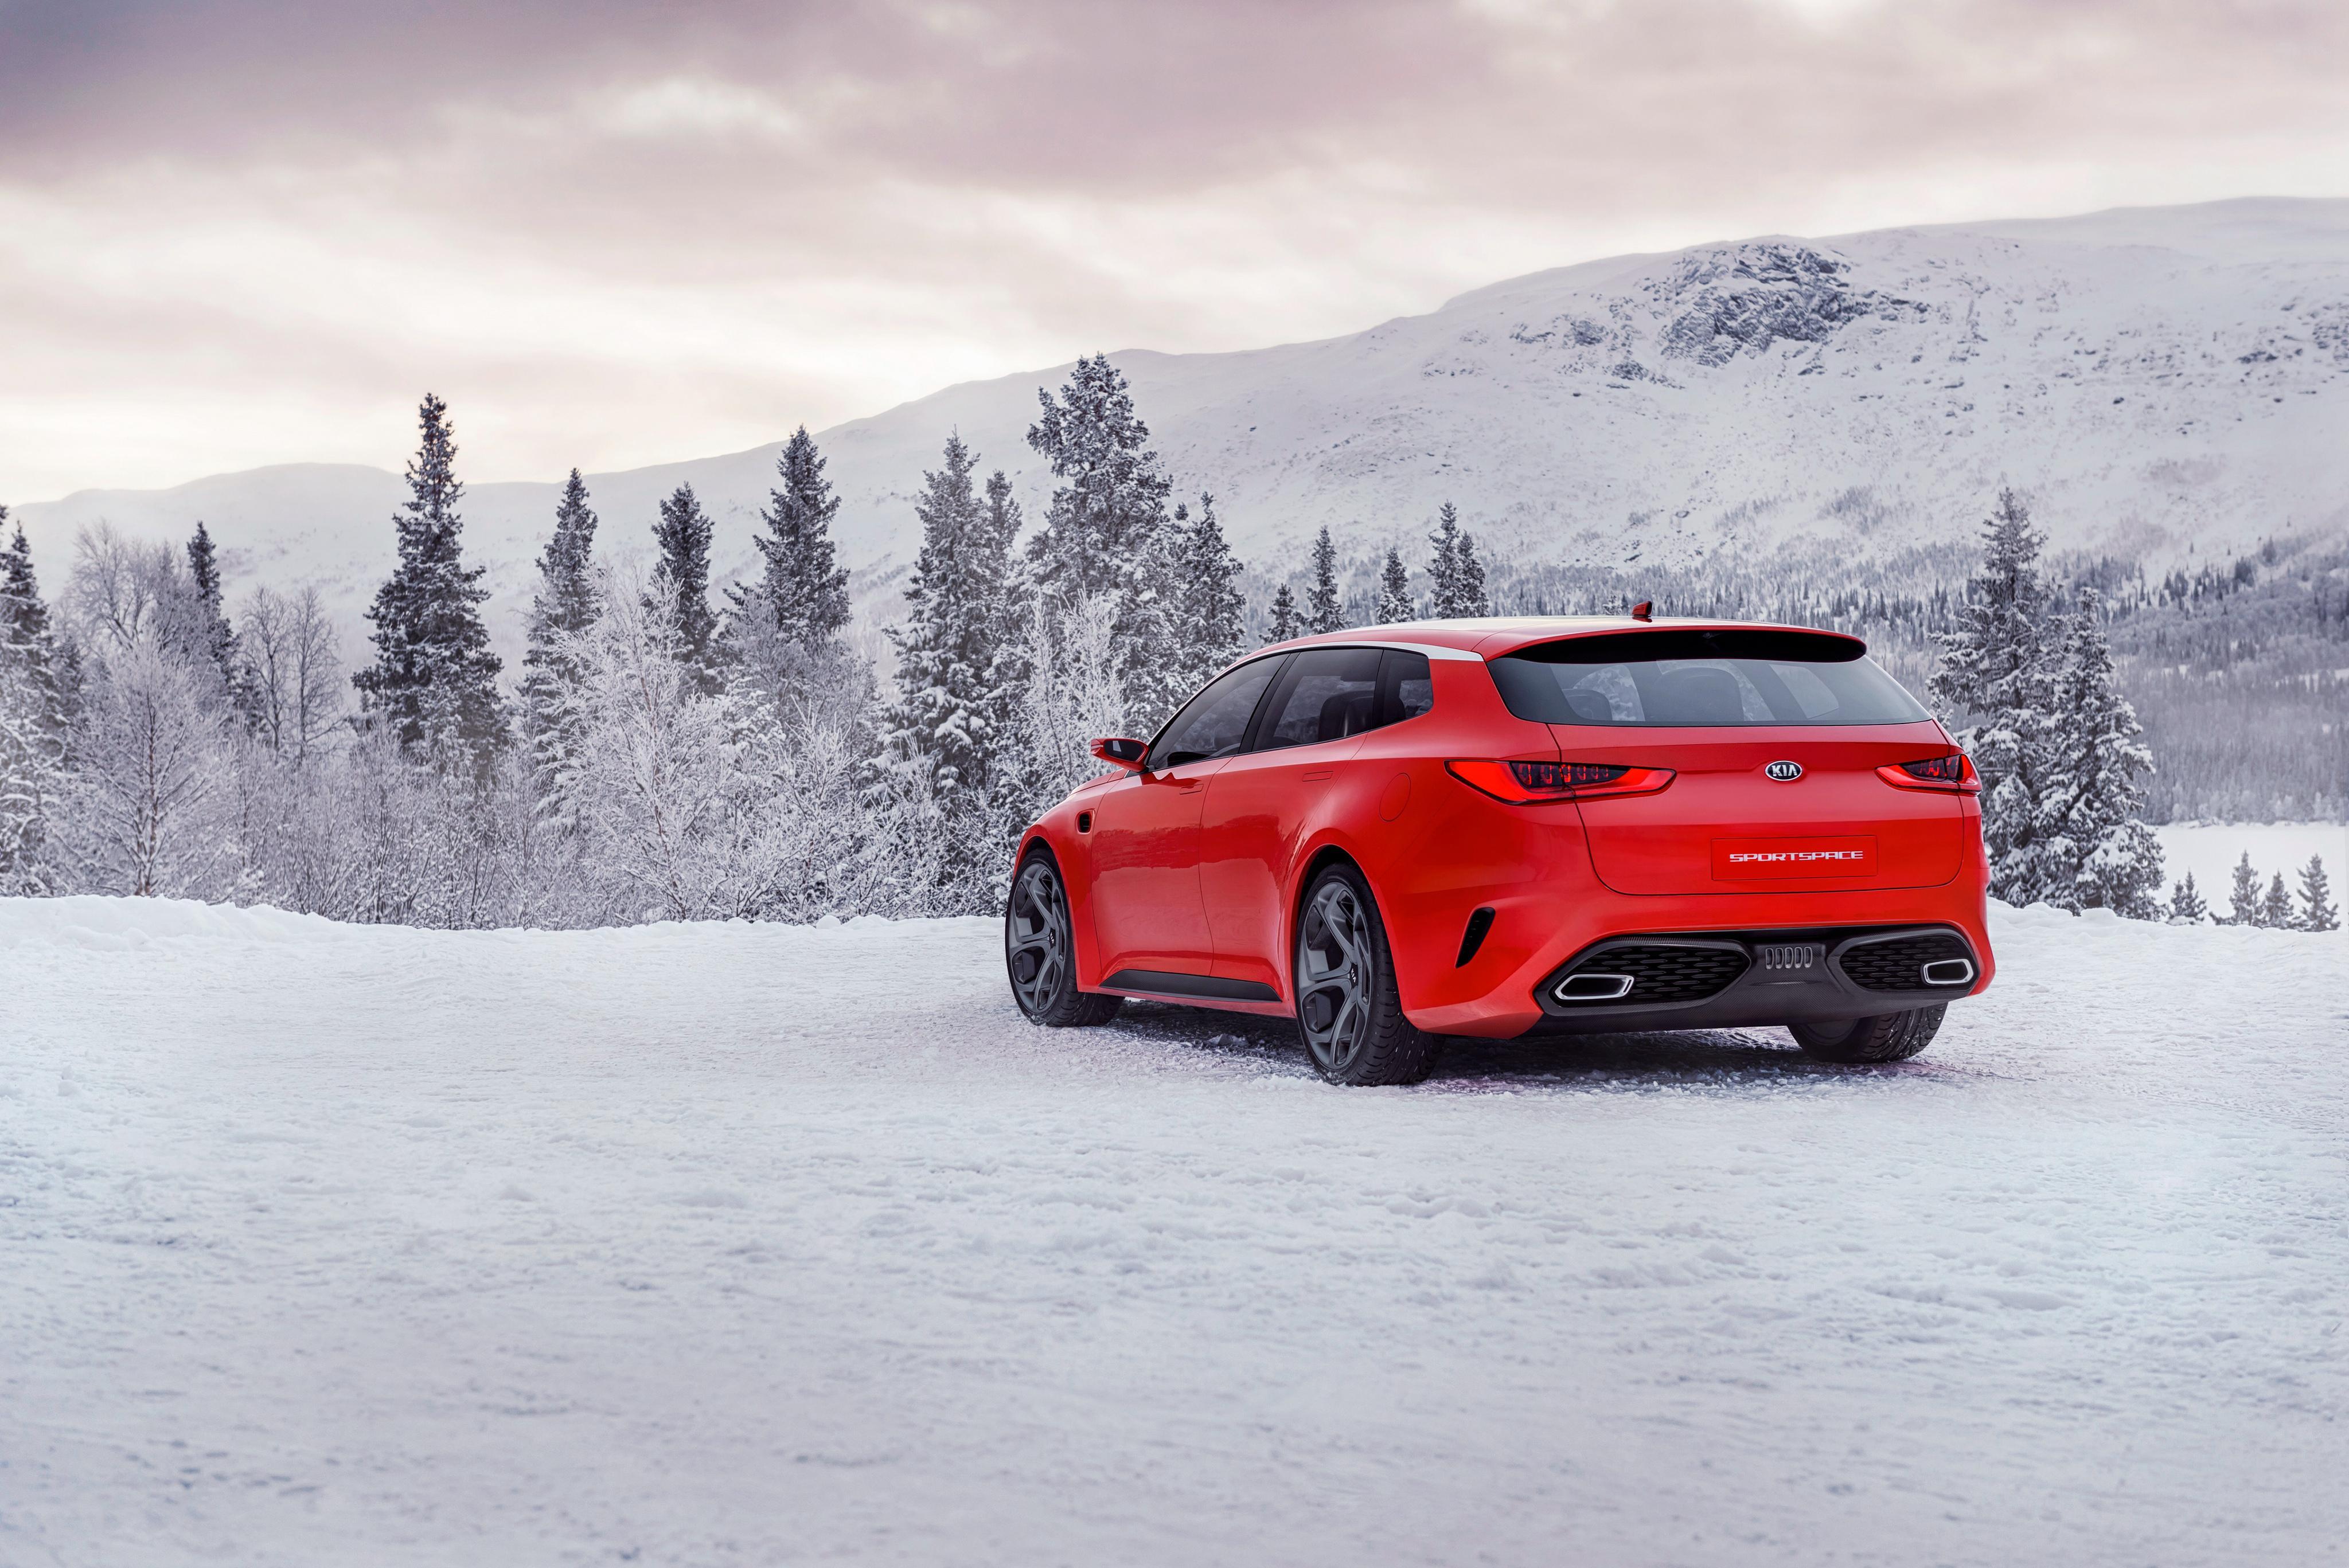 Wallpaper, red, snow, side view, sports car, driving, Kia, Concept